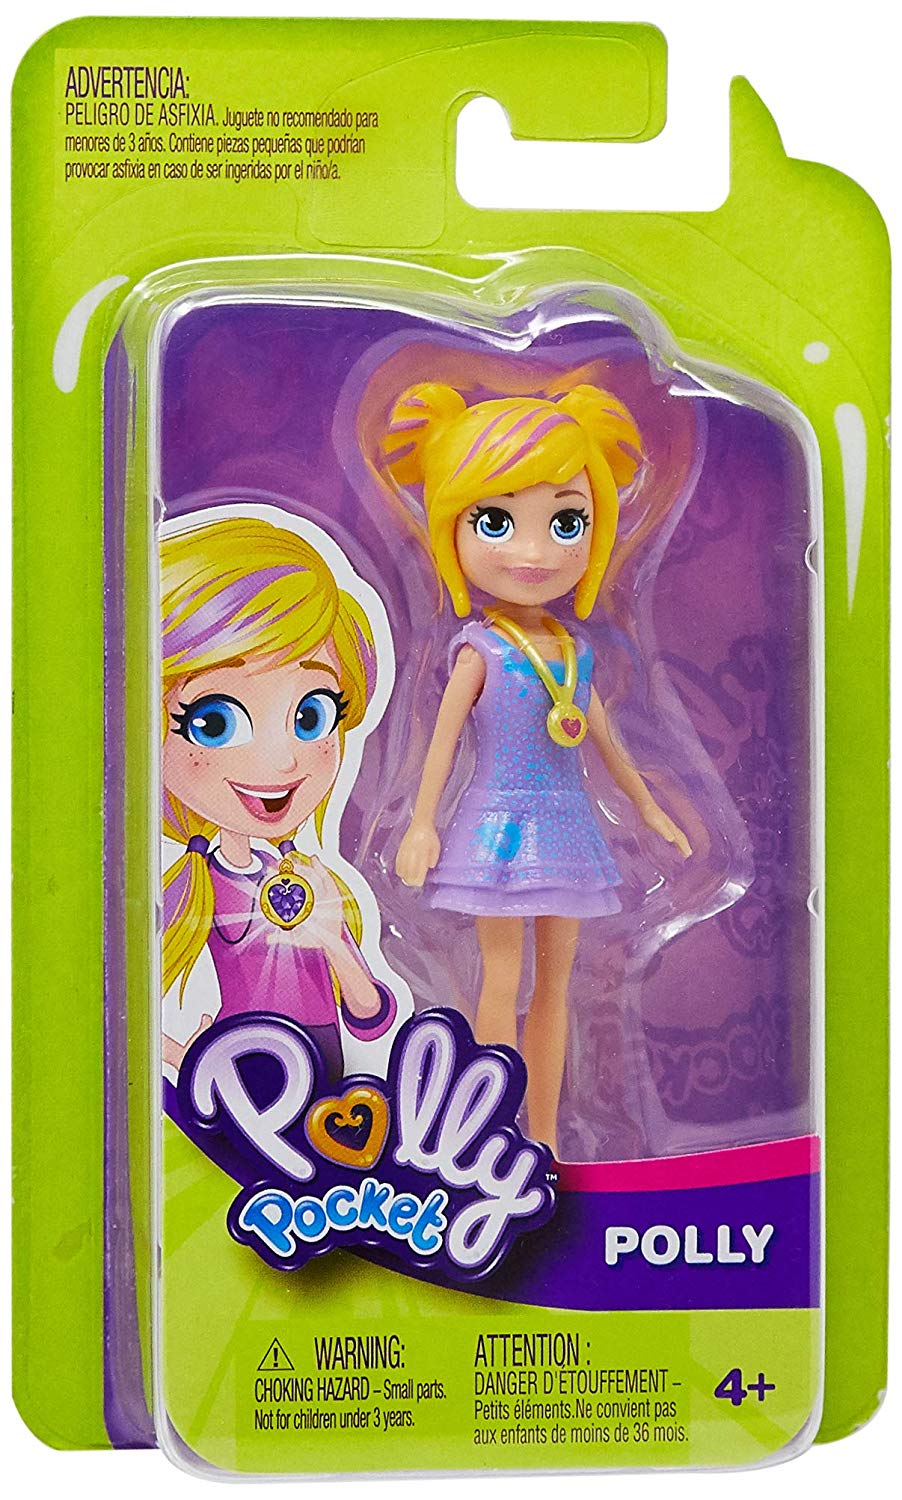 Polly Pocket Doll With Trendy Outfits 2018 Edition Measures Approx. Height: